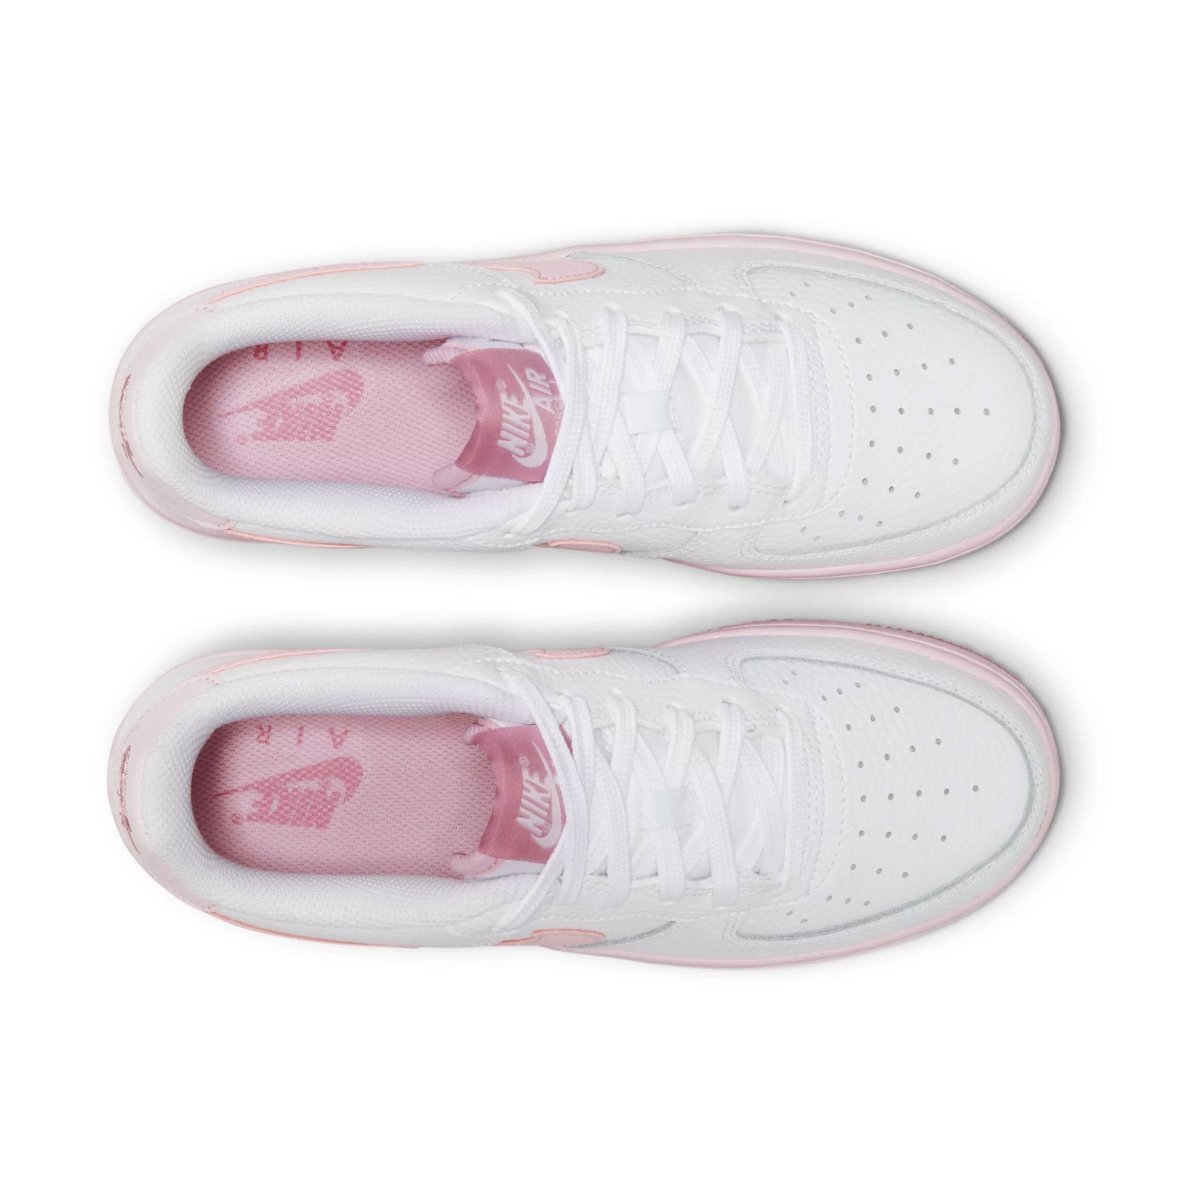 Nike GS (Grade School) Air Force 1 Low White/Pink - 10026634 - West NYC